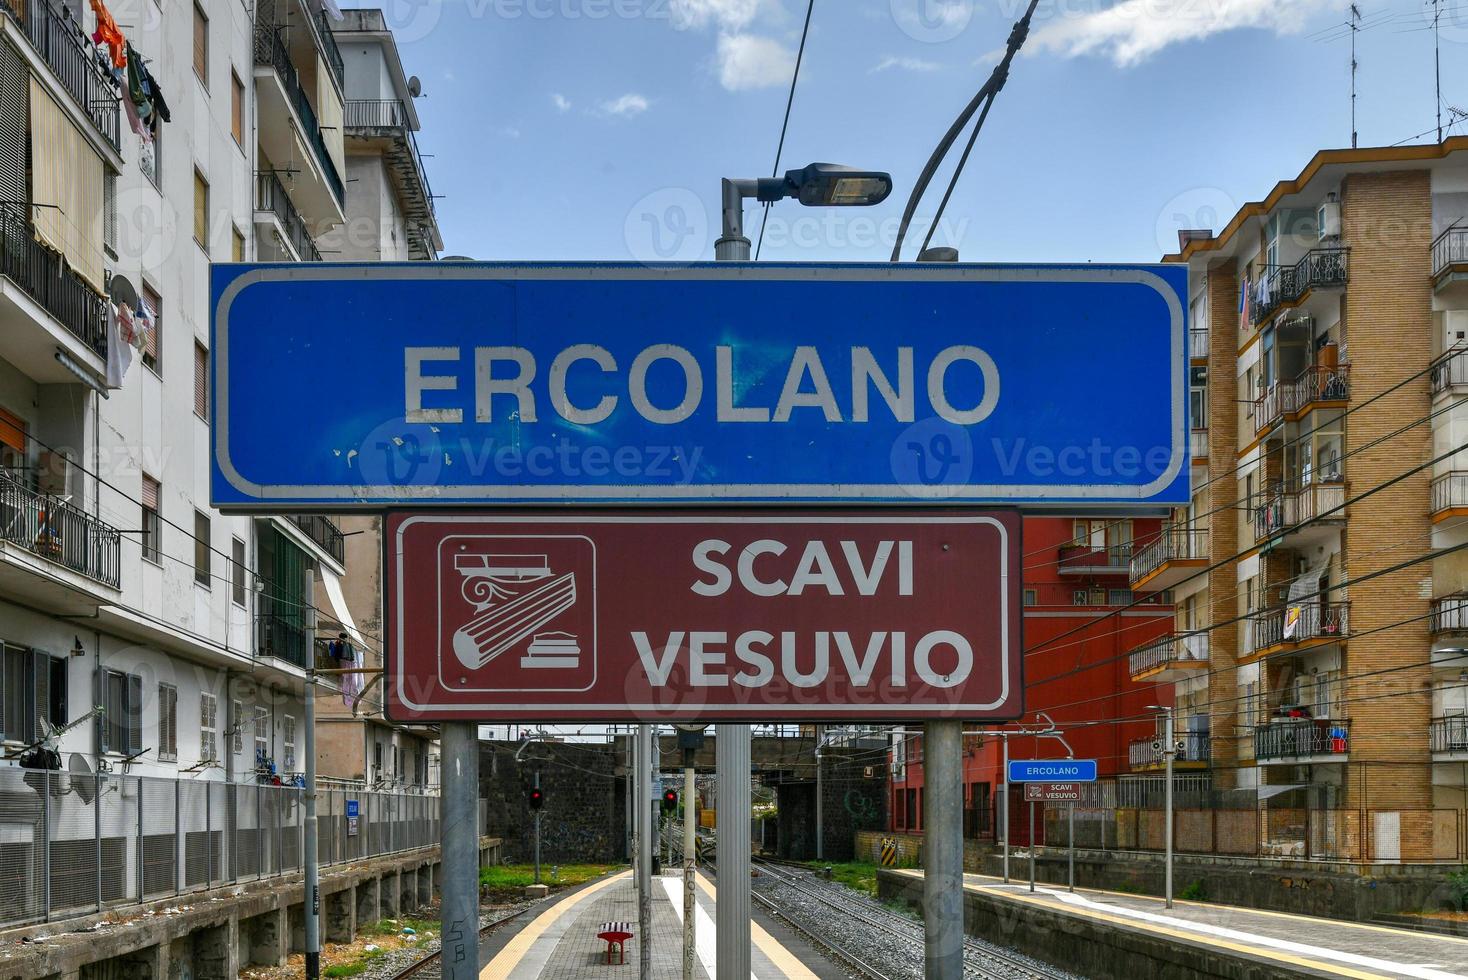 Ercolano railway station on the outskirts of Naples by the ruins of Herculaneum. Inscription Herculaneum - Vesuvius Excavations. photo